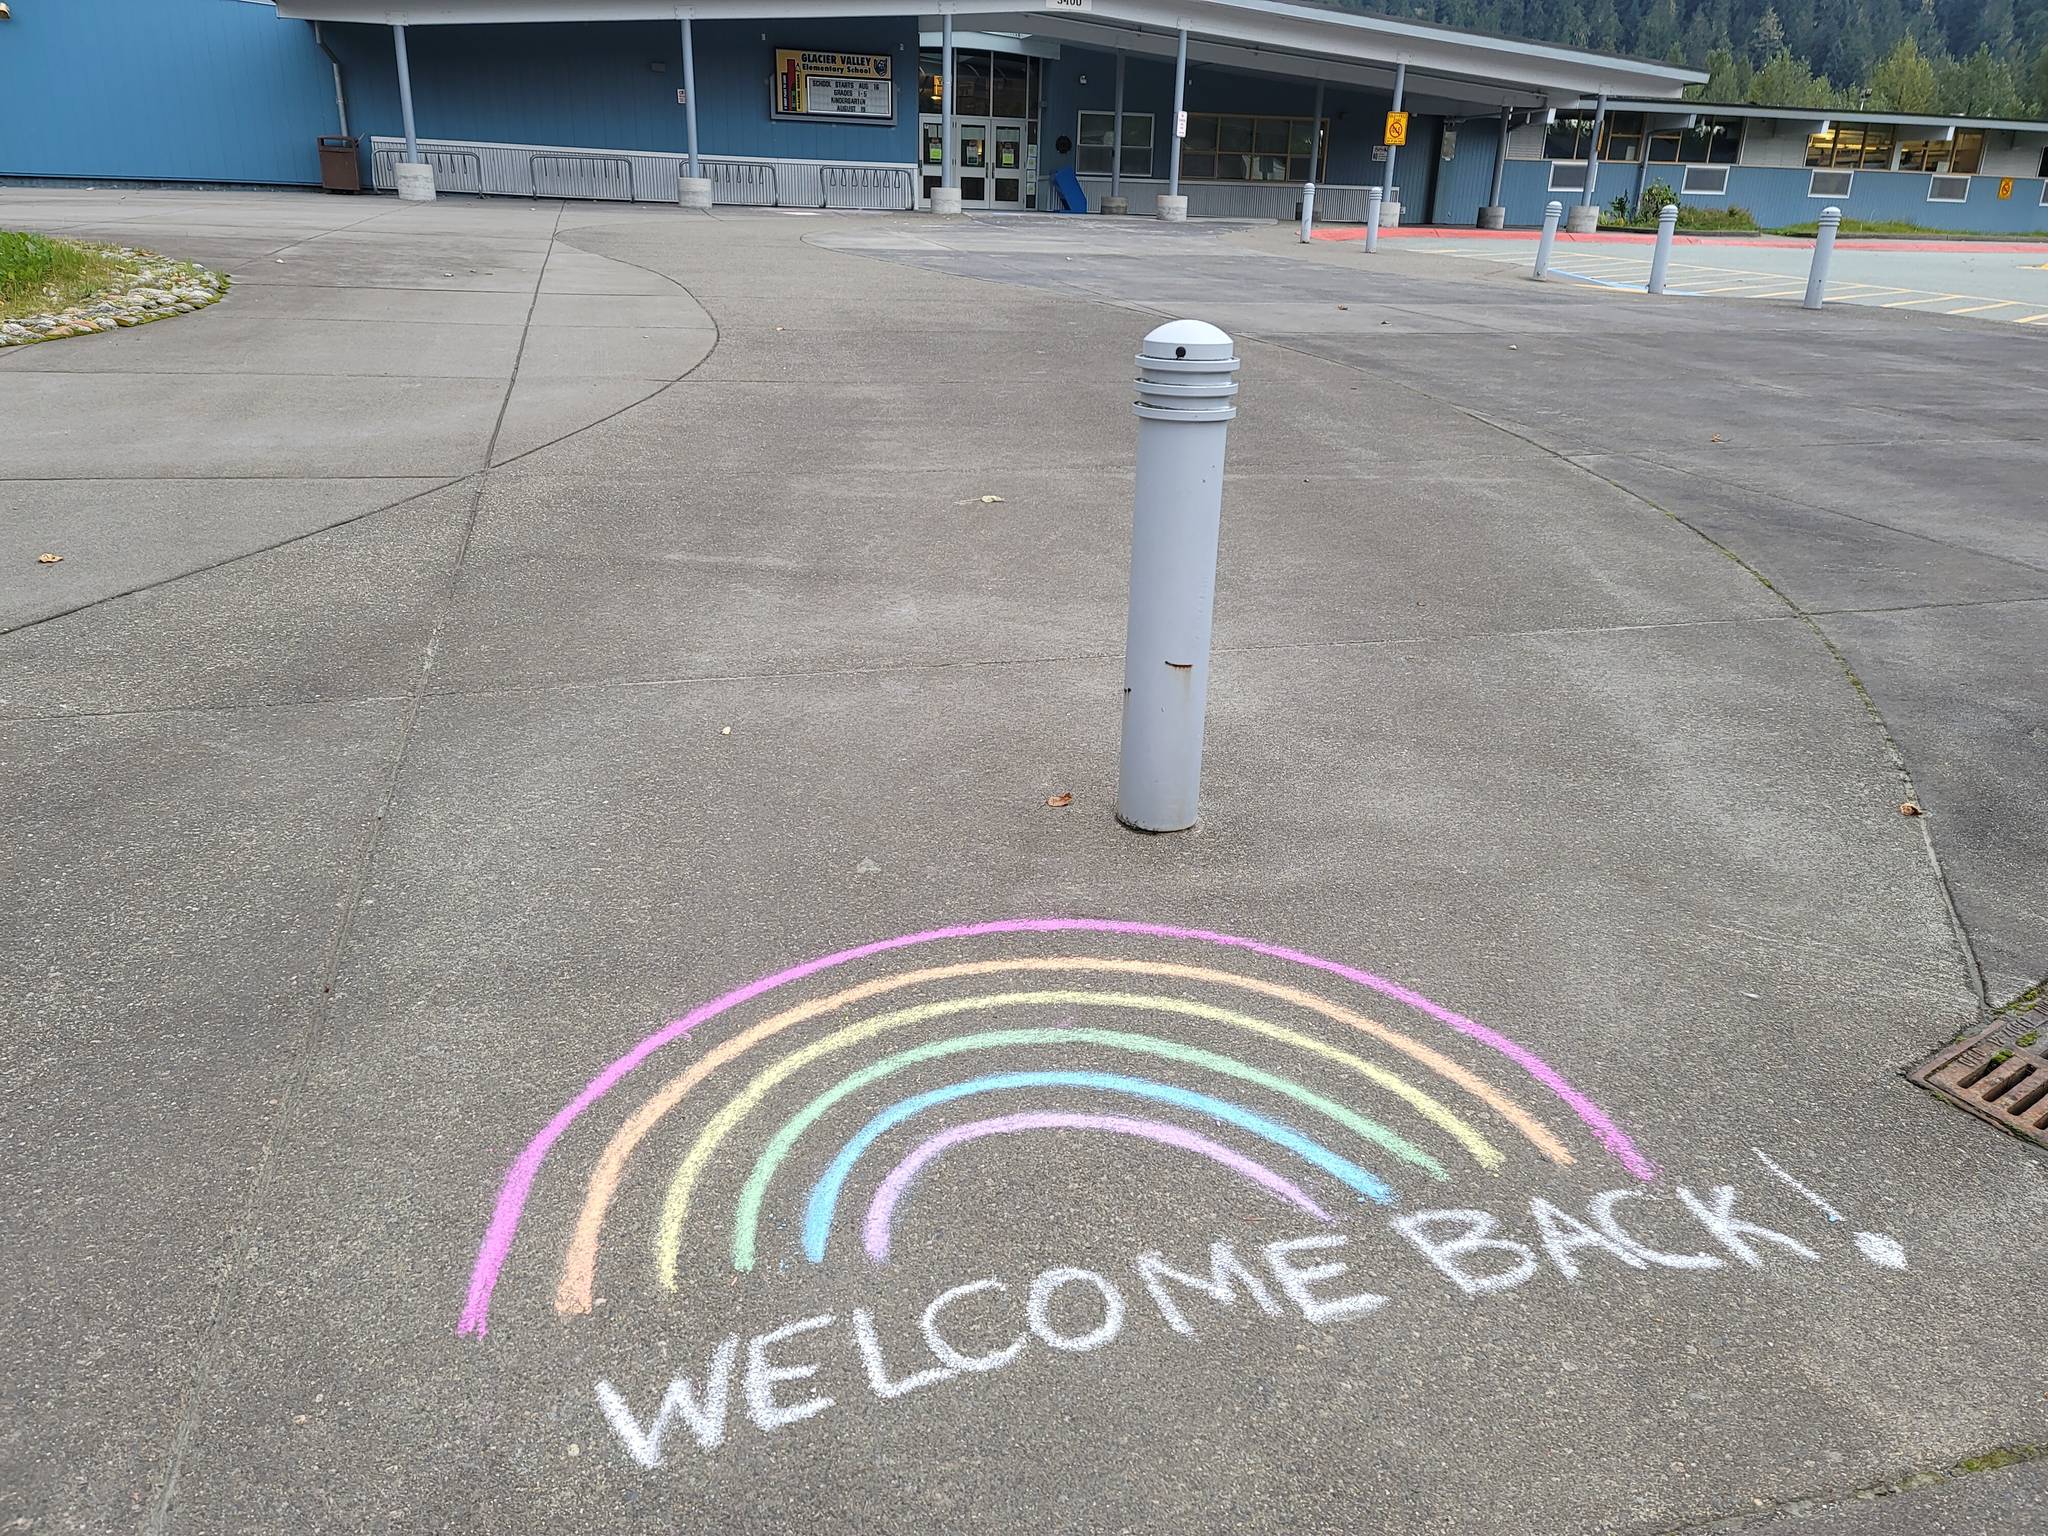 Ben Hohenstatt / Juneau Empire
A sidewalk-based message welcomes students and staff back to Sít’ Eetí Shaanàx-Glacier Valley School ahead of the first day of school on Monday, Aug. 16.